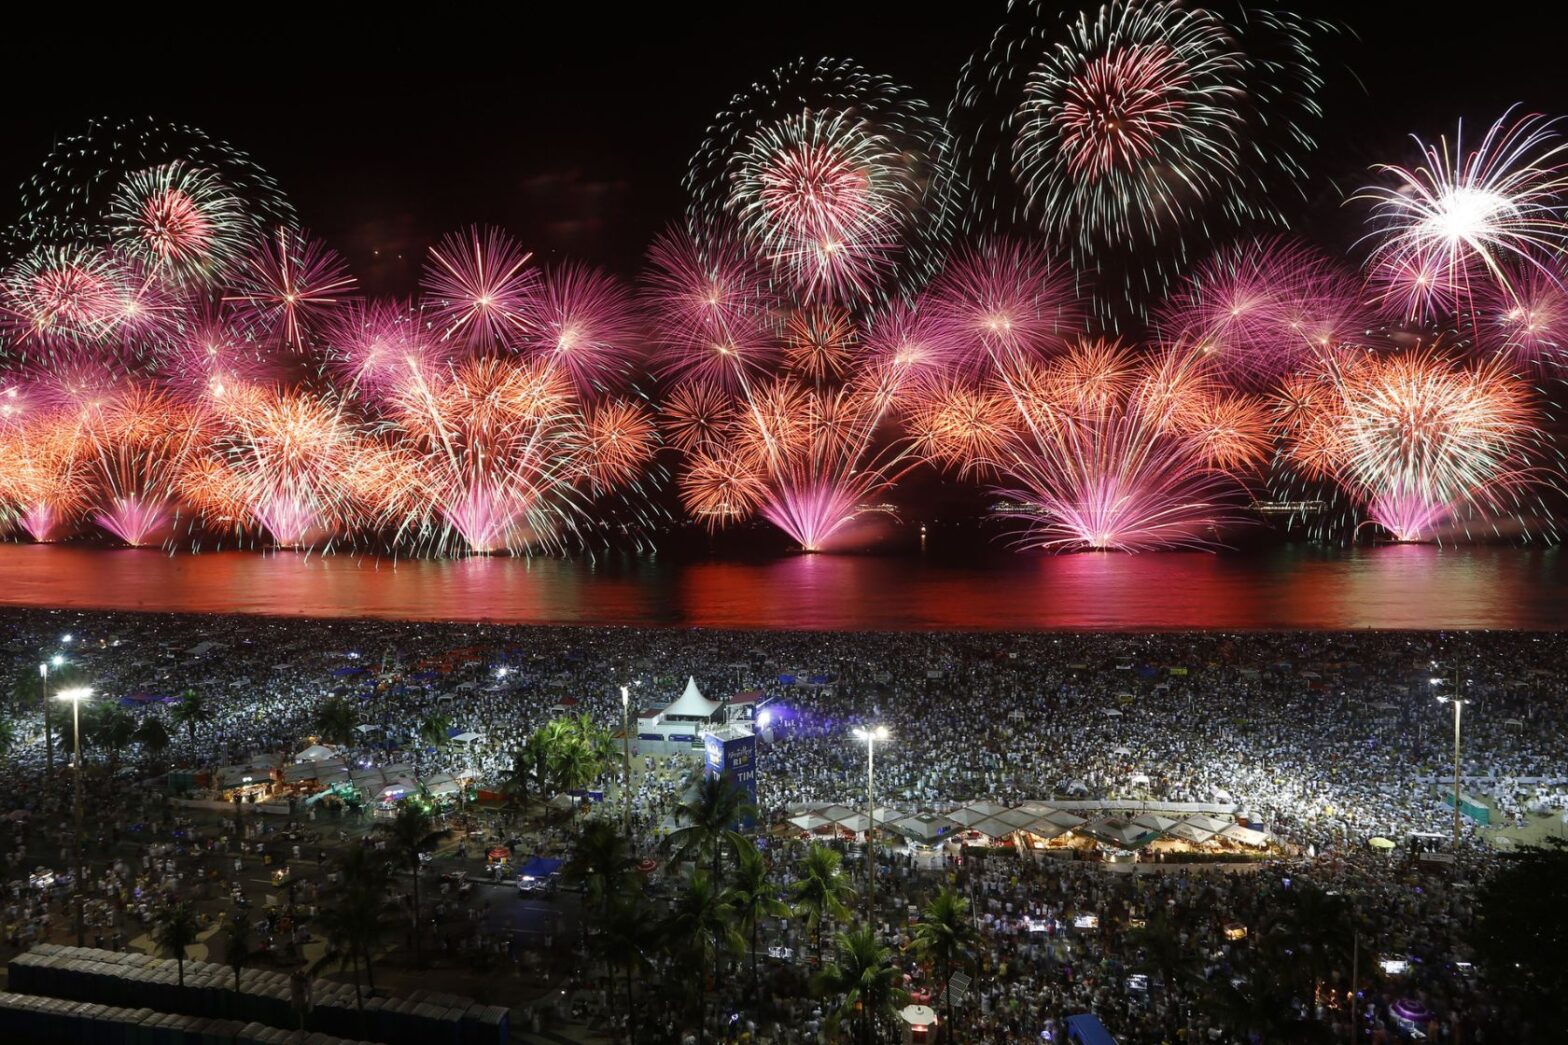 Planning To Go To Brazil This New Year's Eve? Here's Everything You Should Do